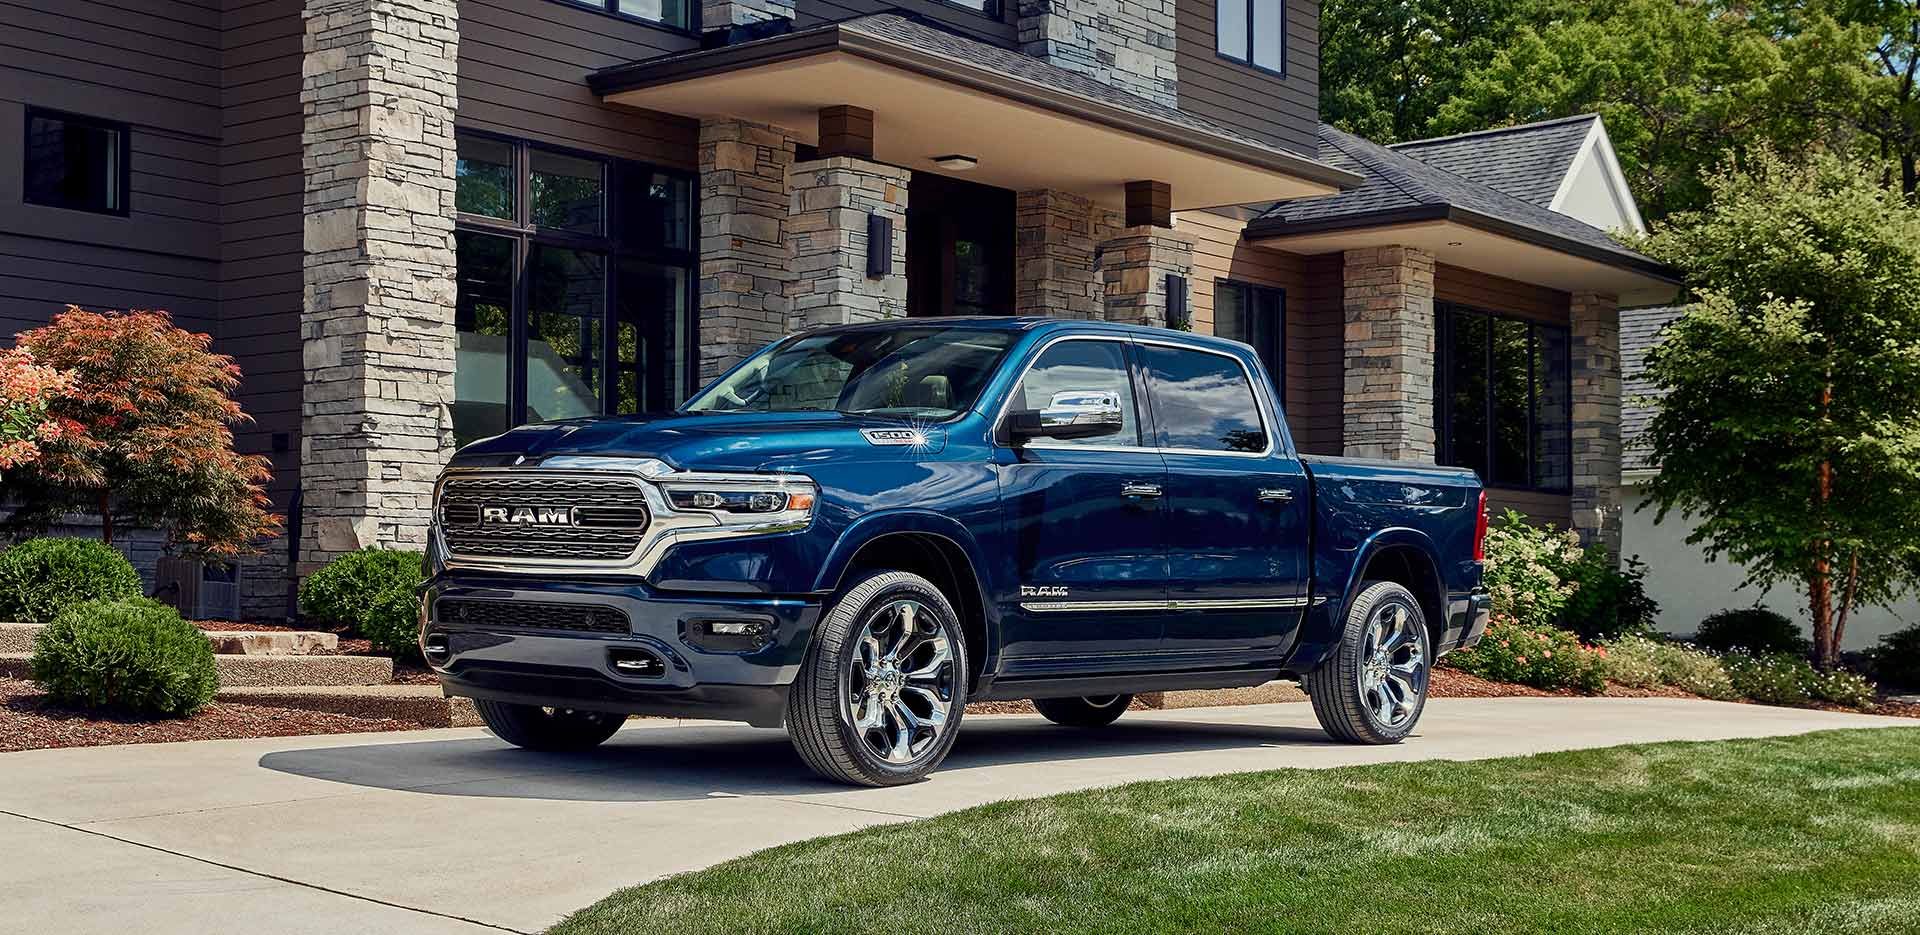 Display The 2023 Ram 1500 parked in the driveway of a large house.